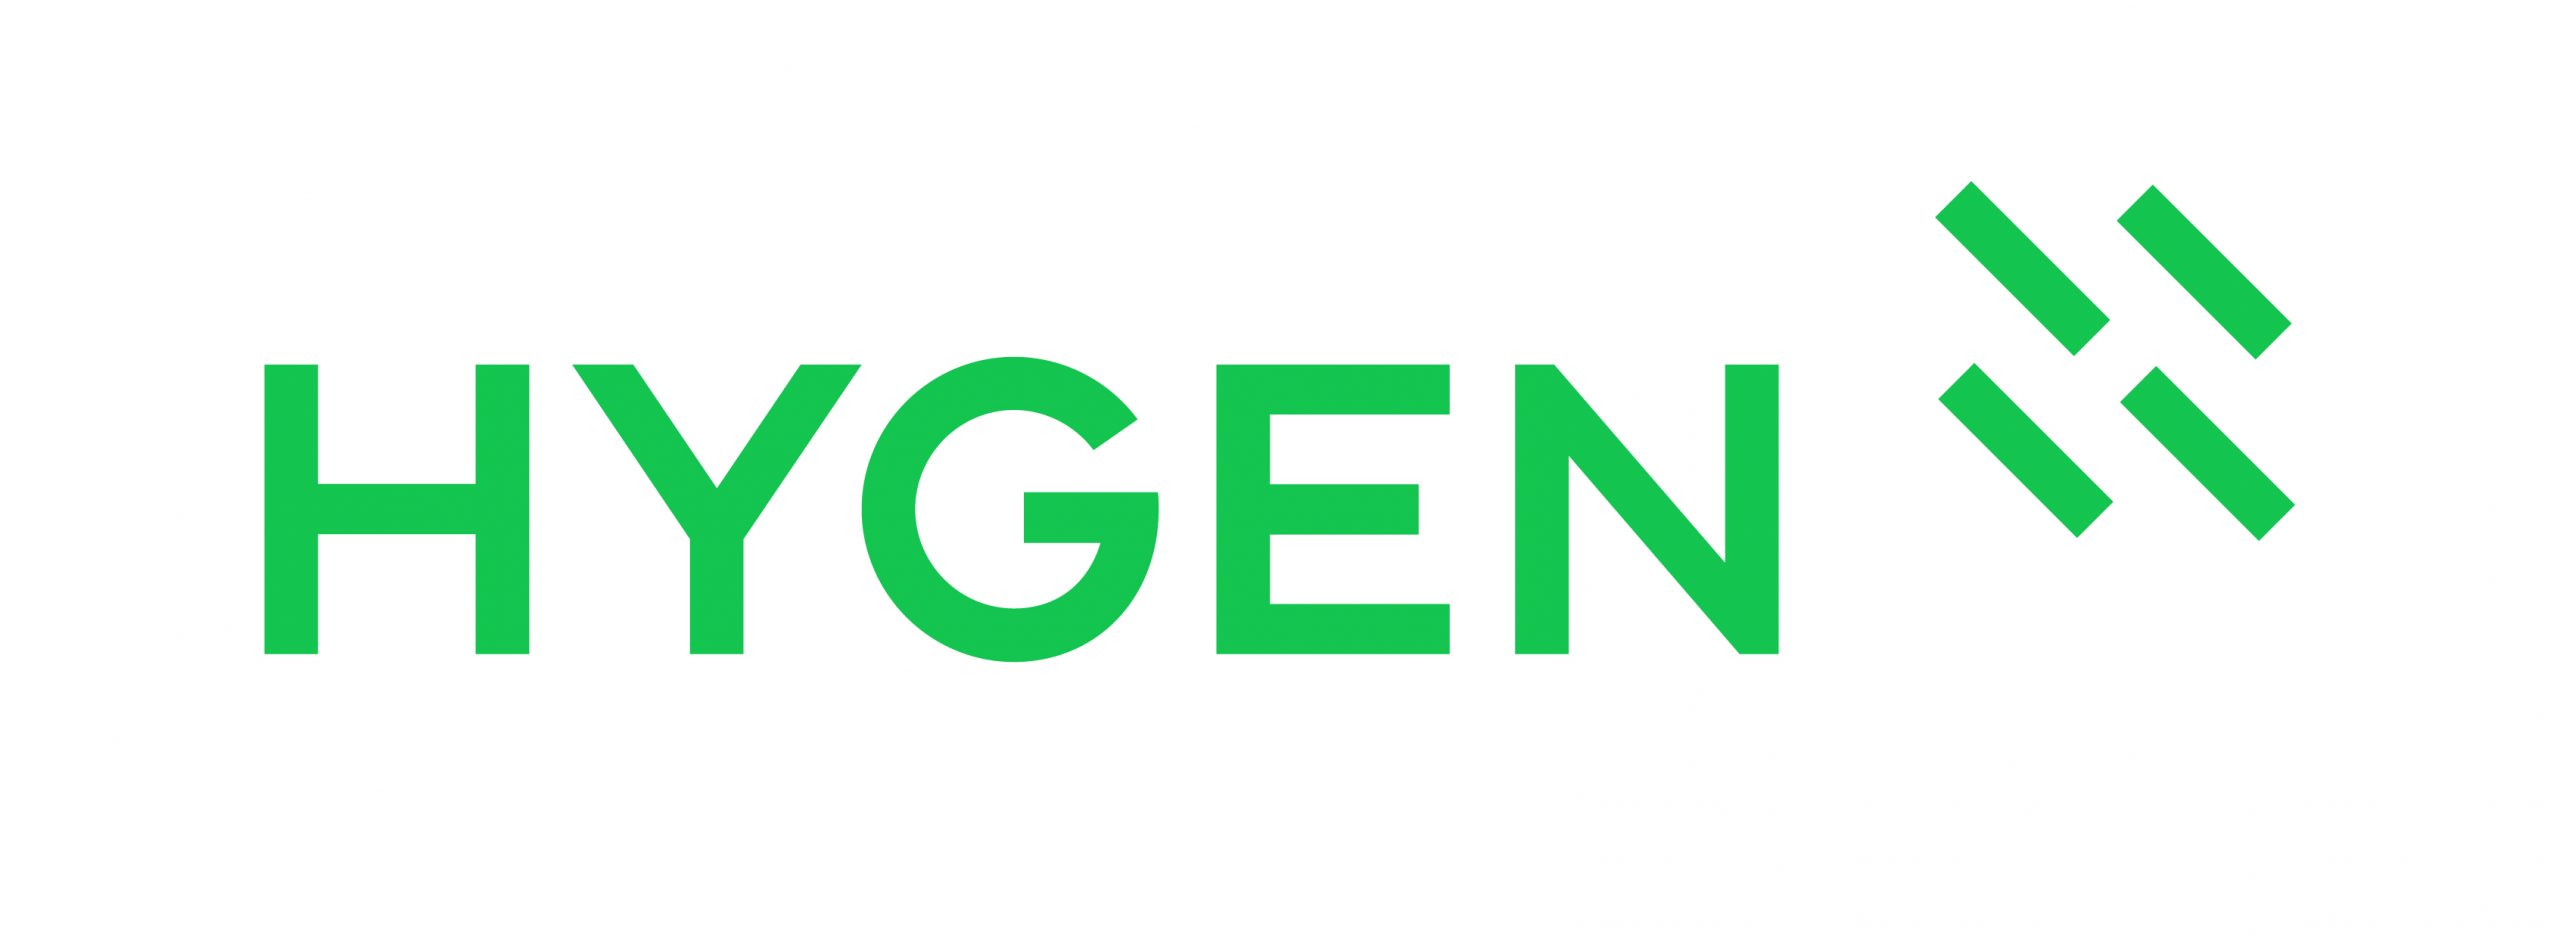 HydraB Power and Armstrong Capital Management enter into joint venture HyGen Energy Holdings Limited